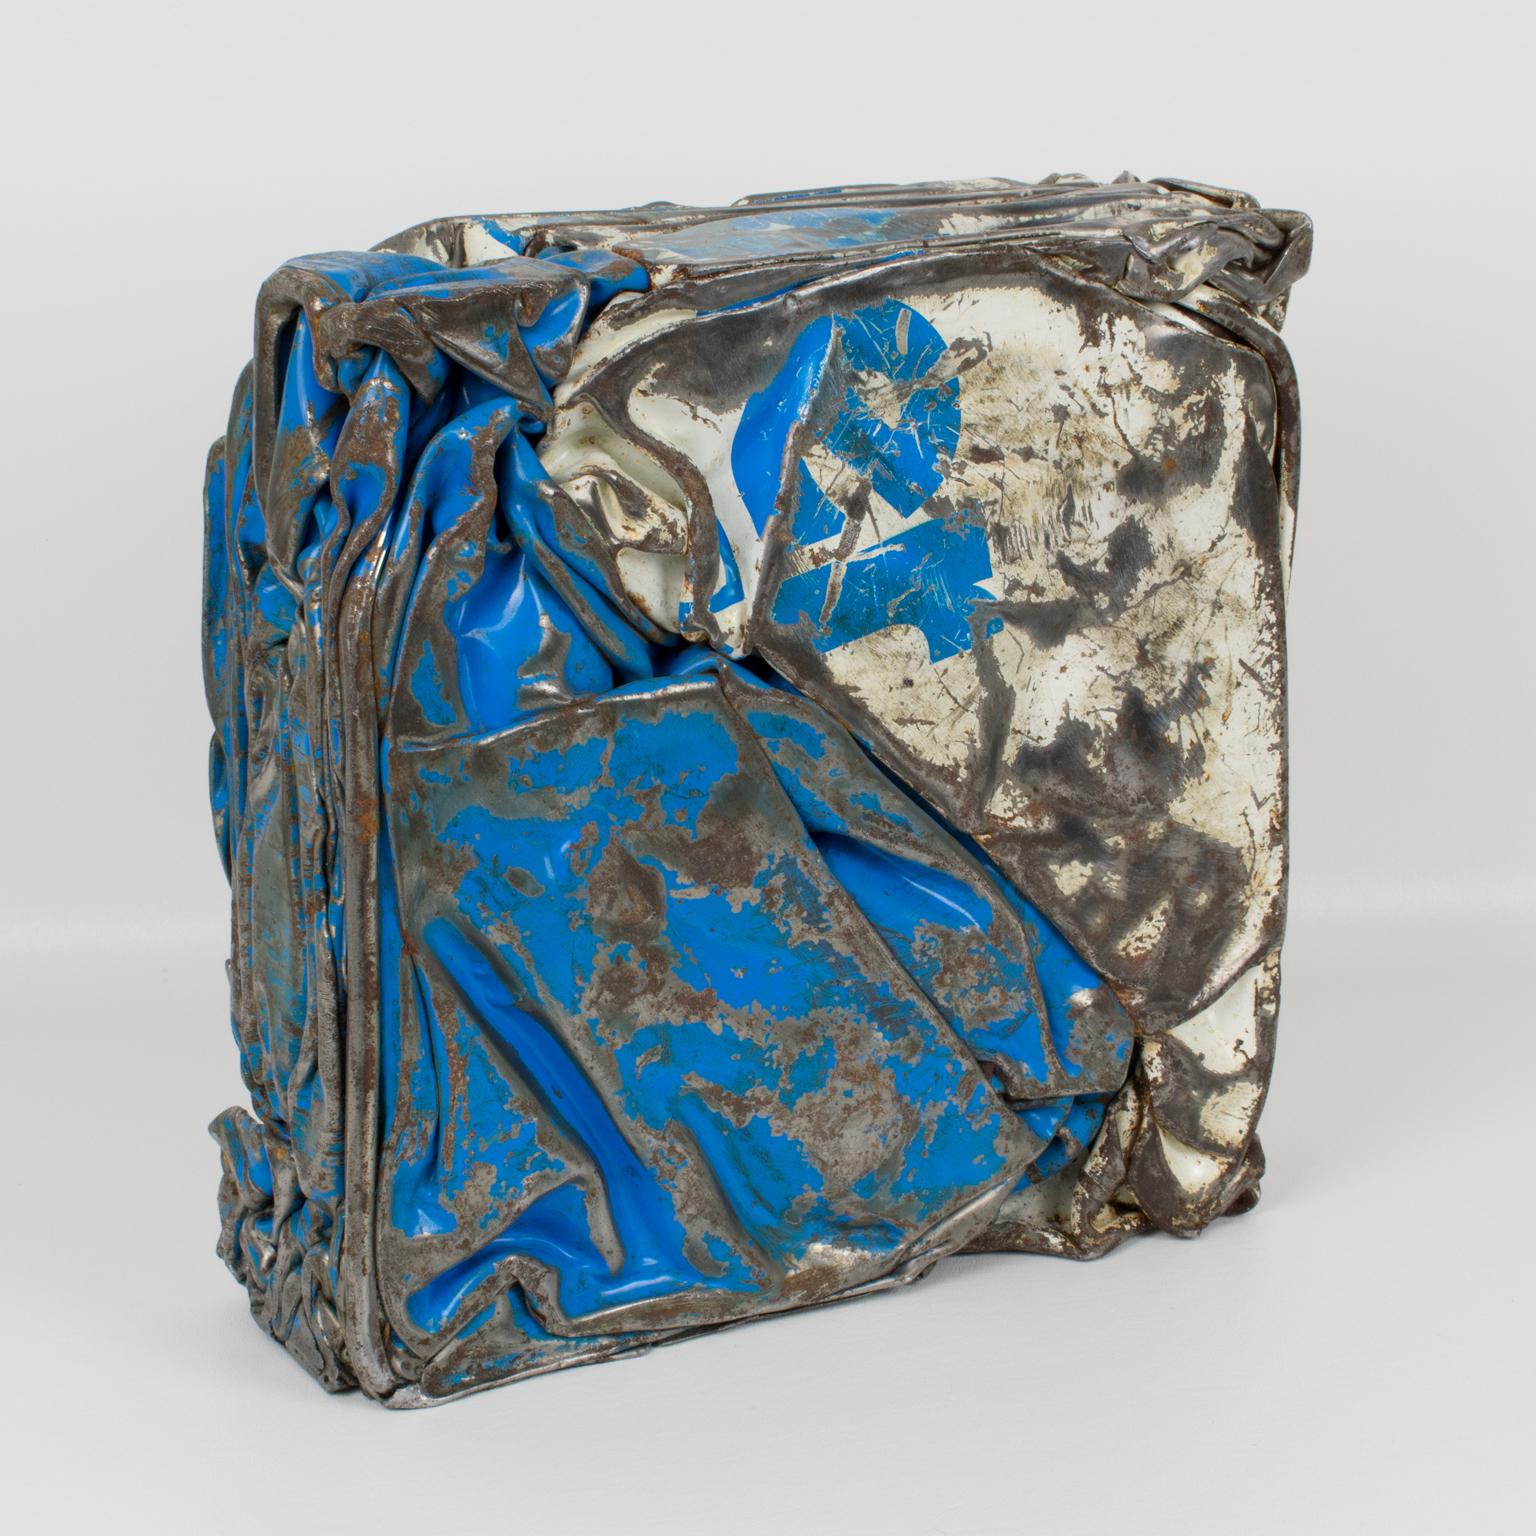 Stunning French abstract sculpture, featuring a compression of industrial metal elements. Eye-catching design with original paint in blue and white colors with raw metal detailing. Each face offers a versatile view of the artist's work. French